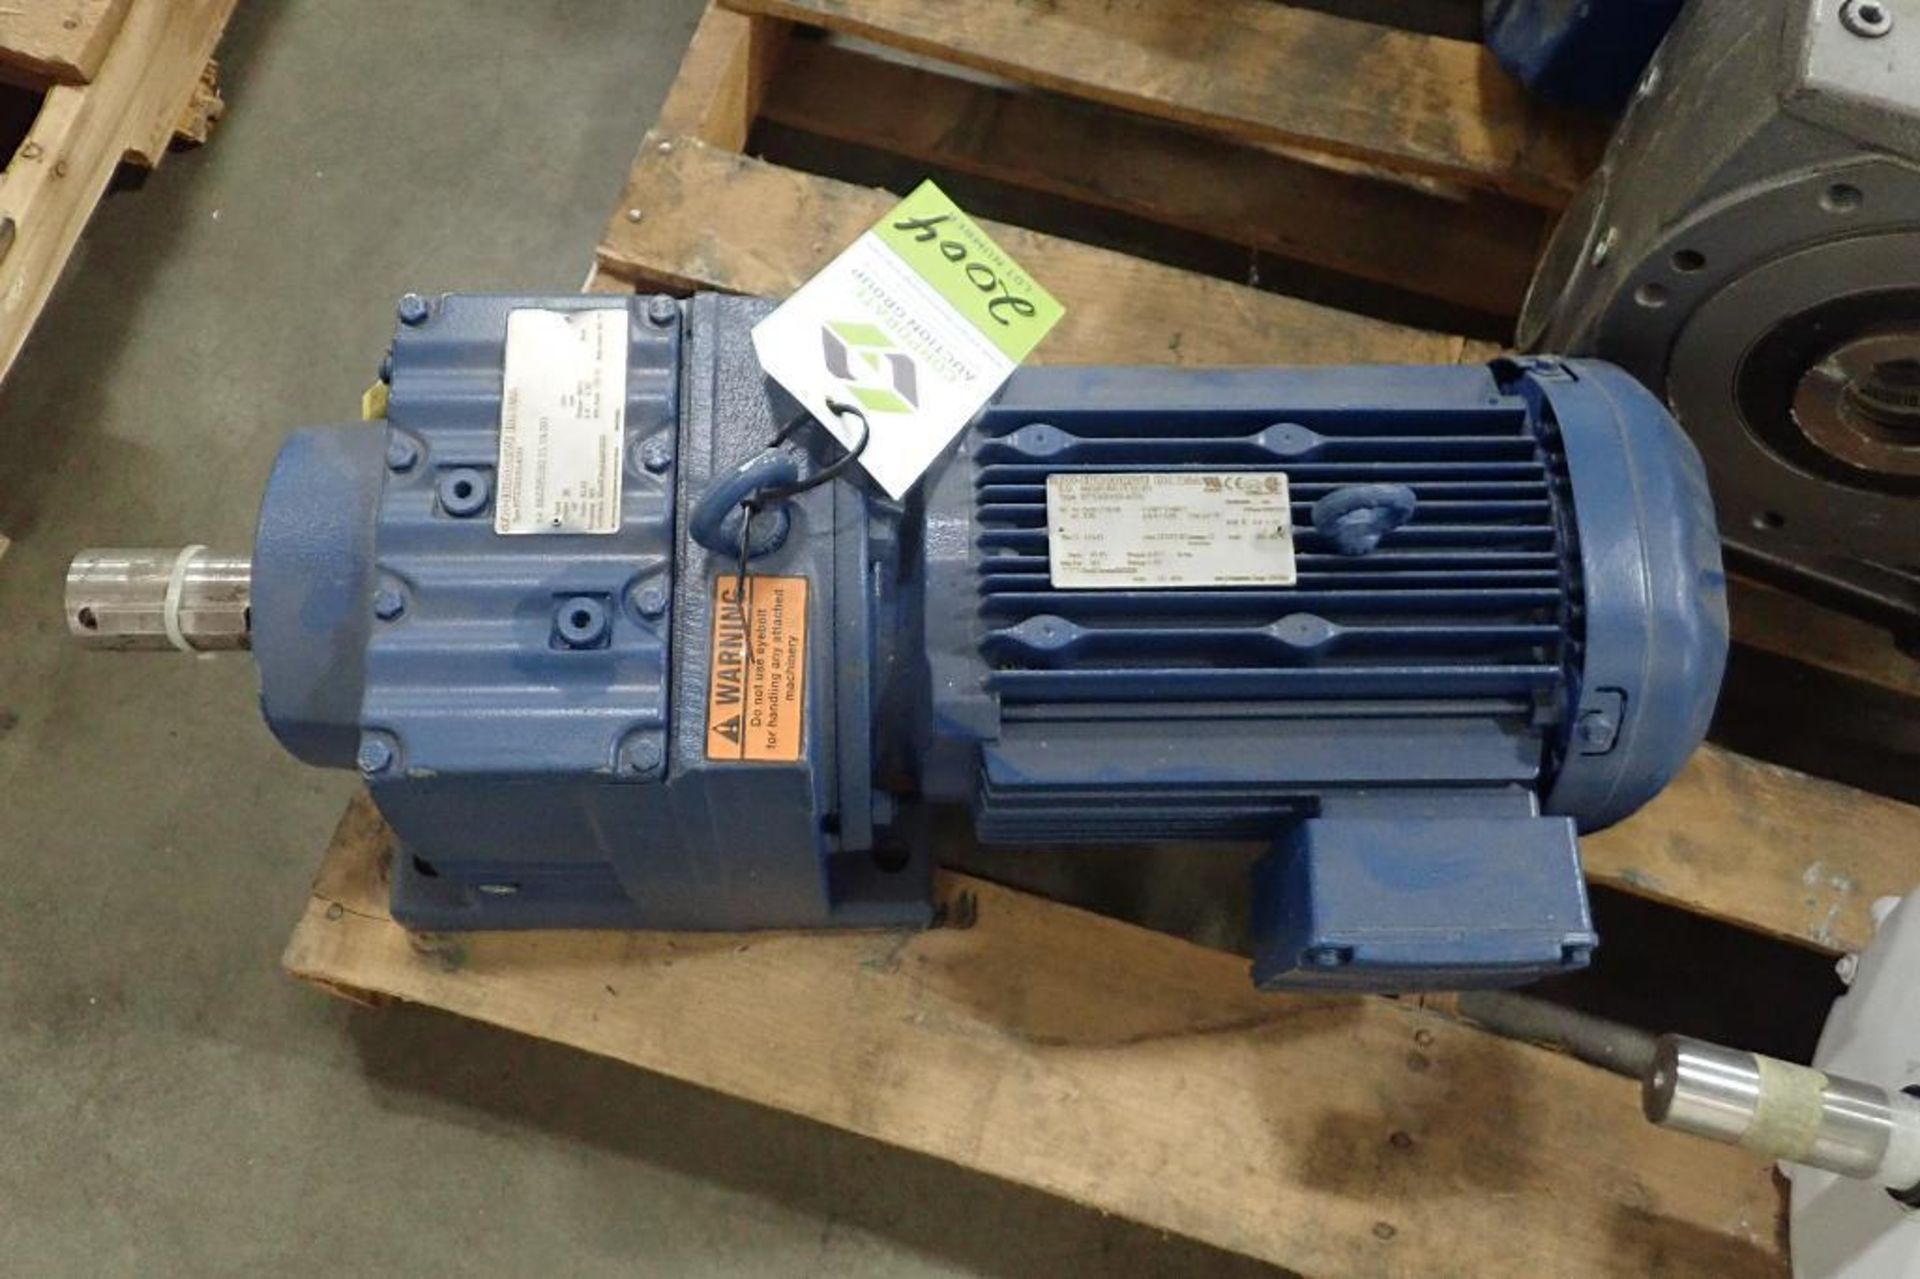 SEW 3 hp electric motor and gearbox. (See photos for additional specs). **Rigging Fee: $25** (Locate